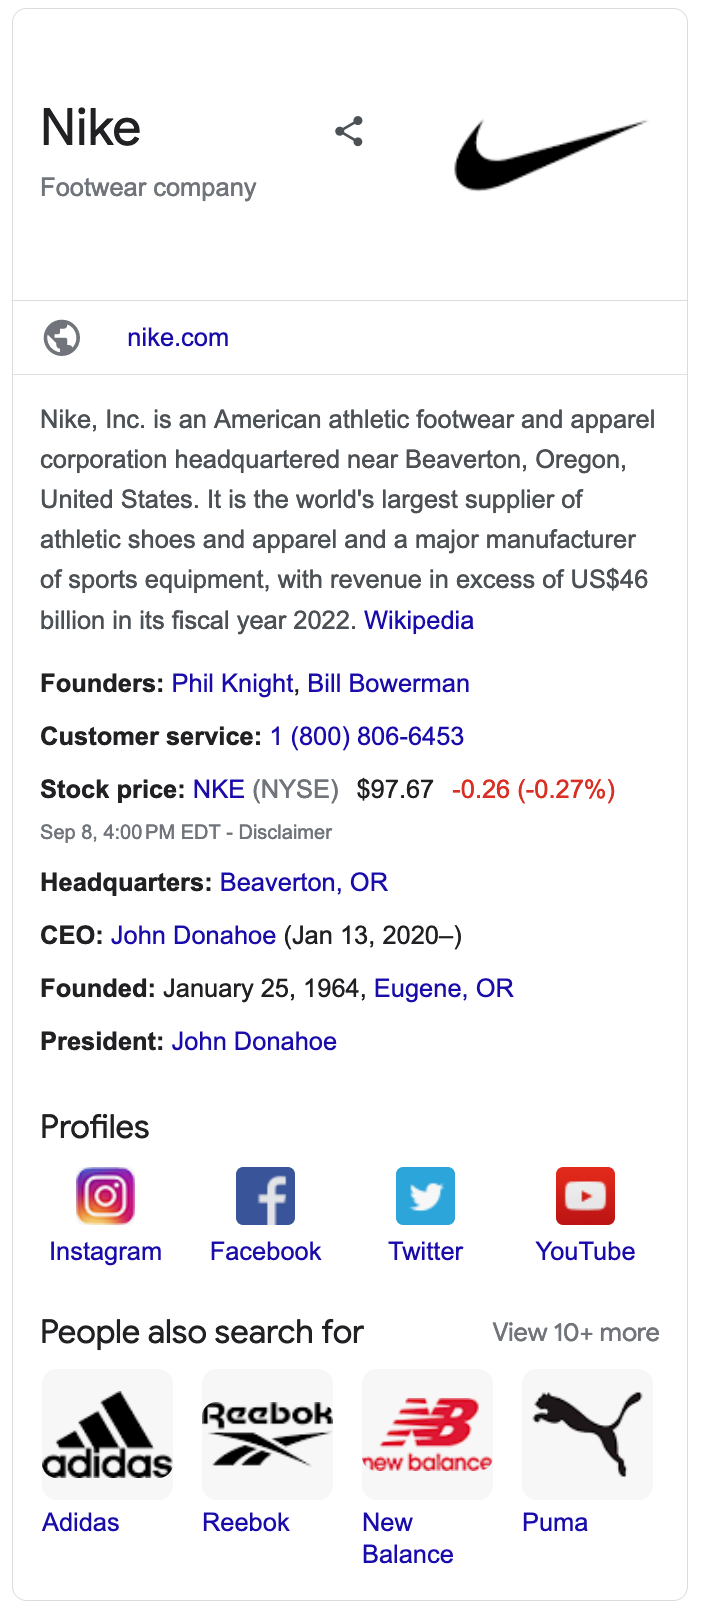 Nike's Google Knowledge Panel as shown in Google Search Results.